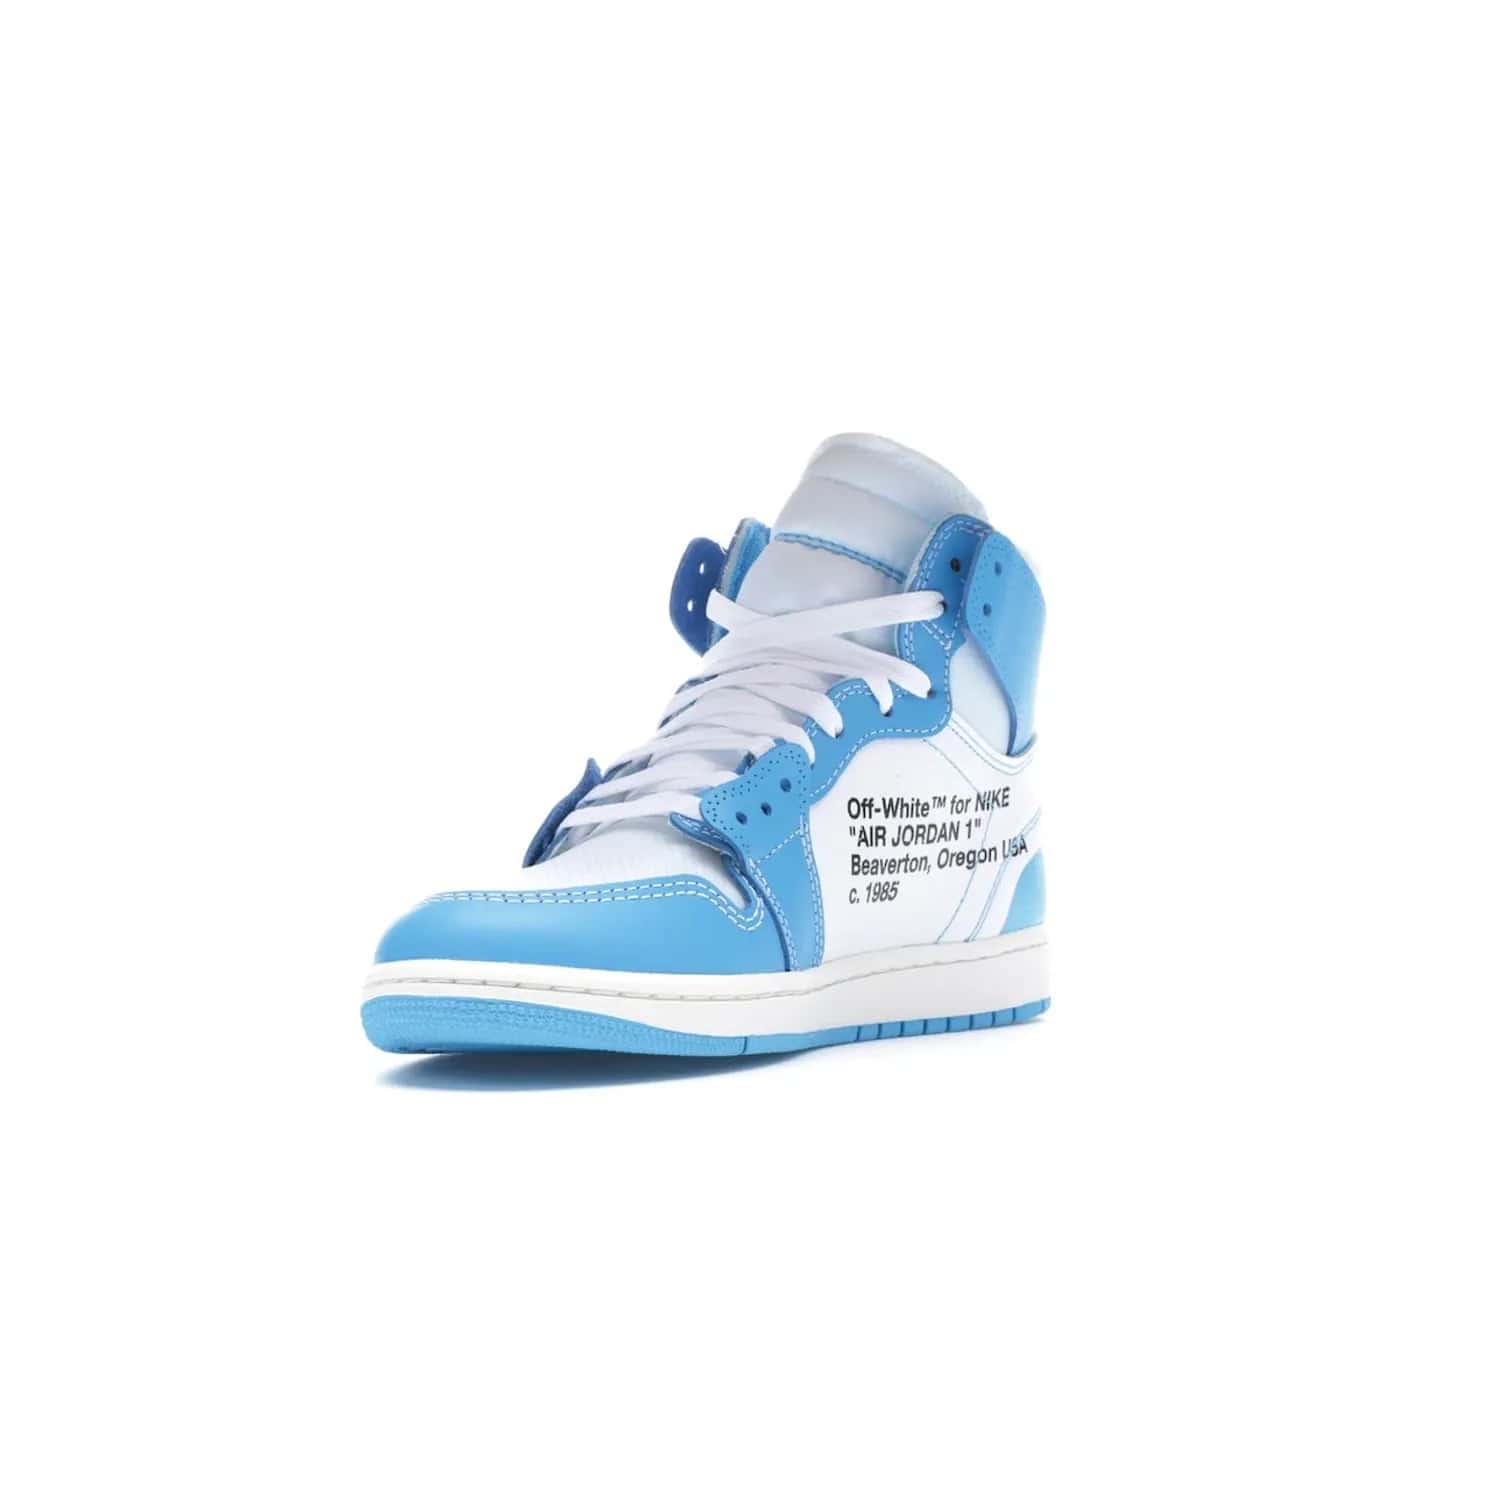 Jordan 1 Retro High Off-White University Blue - Image 14 - Only at www.BallersClubKickz.com - Classic Jordan 1 Retro High "Off-White UNC" sneakers meld style and comfort. Boasting deconstructed white and blue leather, Off-White detailing, and a white, dark powder blue and cone colorway, these sneakers are perfect for dressing up or down. Get the iconic Off-White Jordan 1's and upgrade your look.